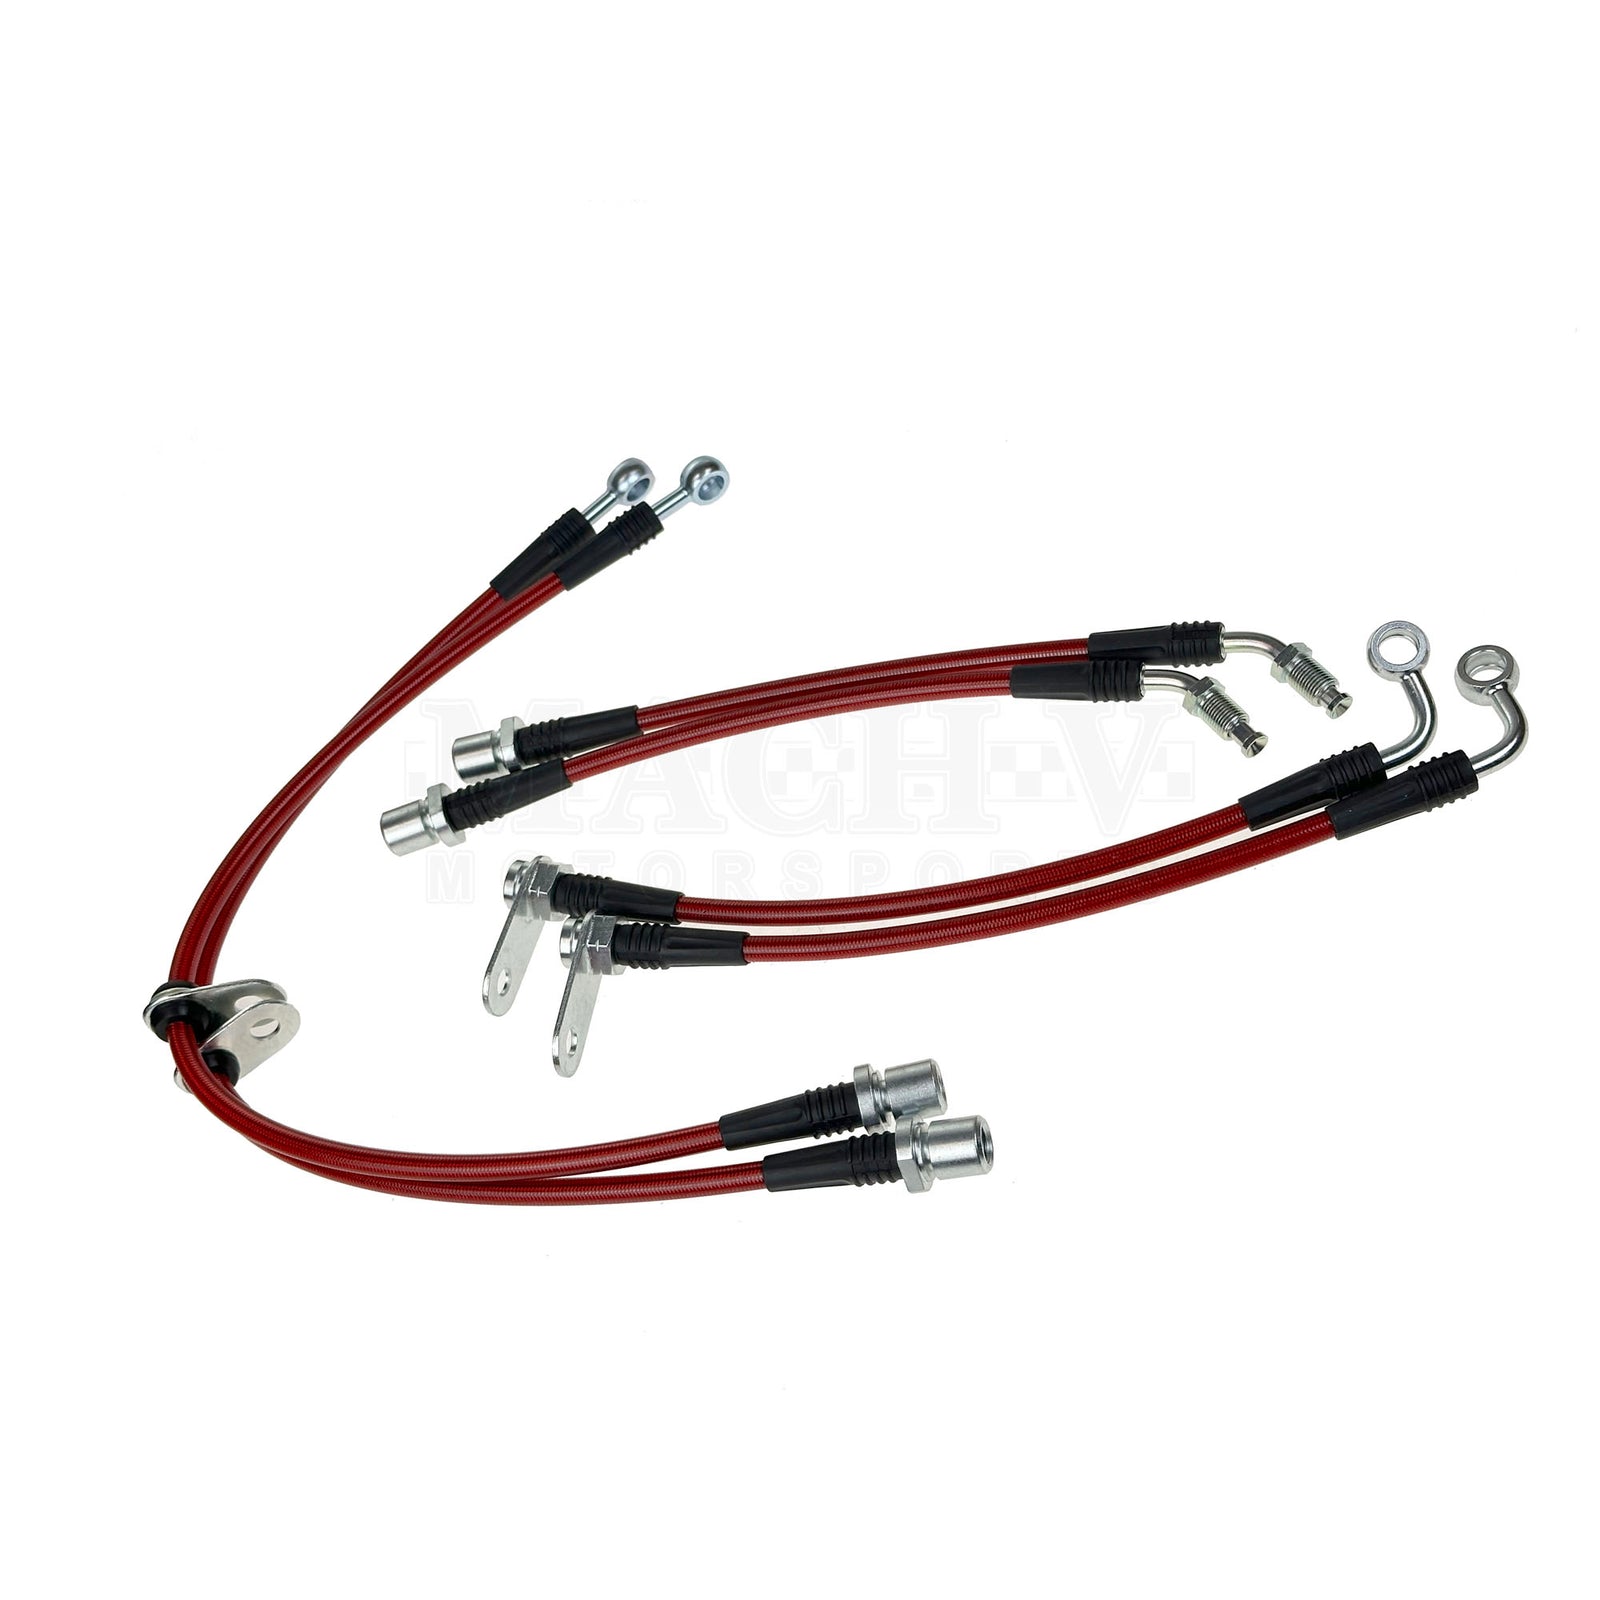 Ebc Brakes Bla7567-4l Front And Rear Stainless Steel Braided Brake Lines, Free Shipping To Canada And Usa